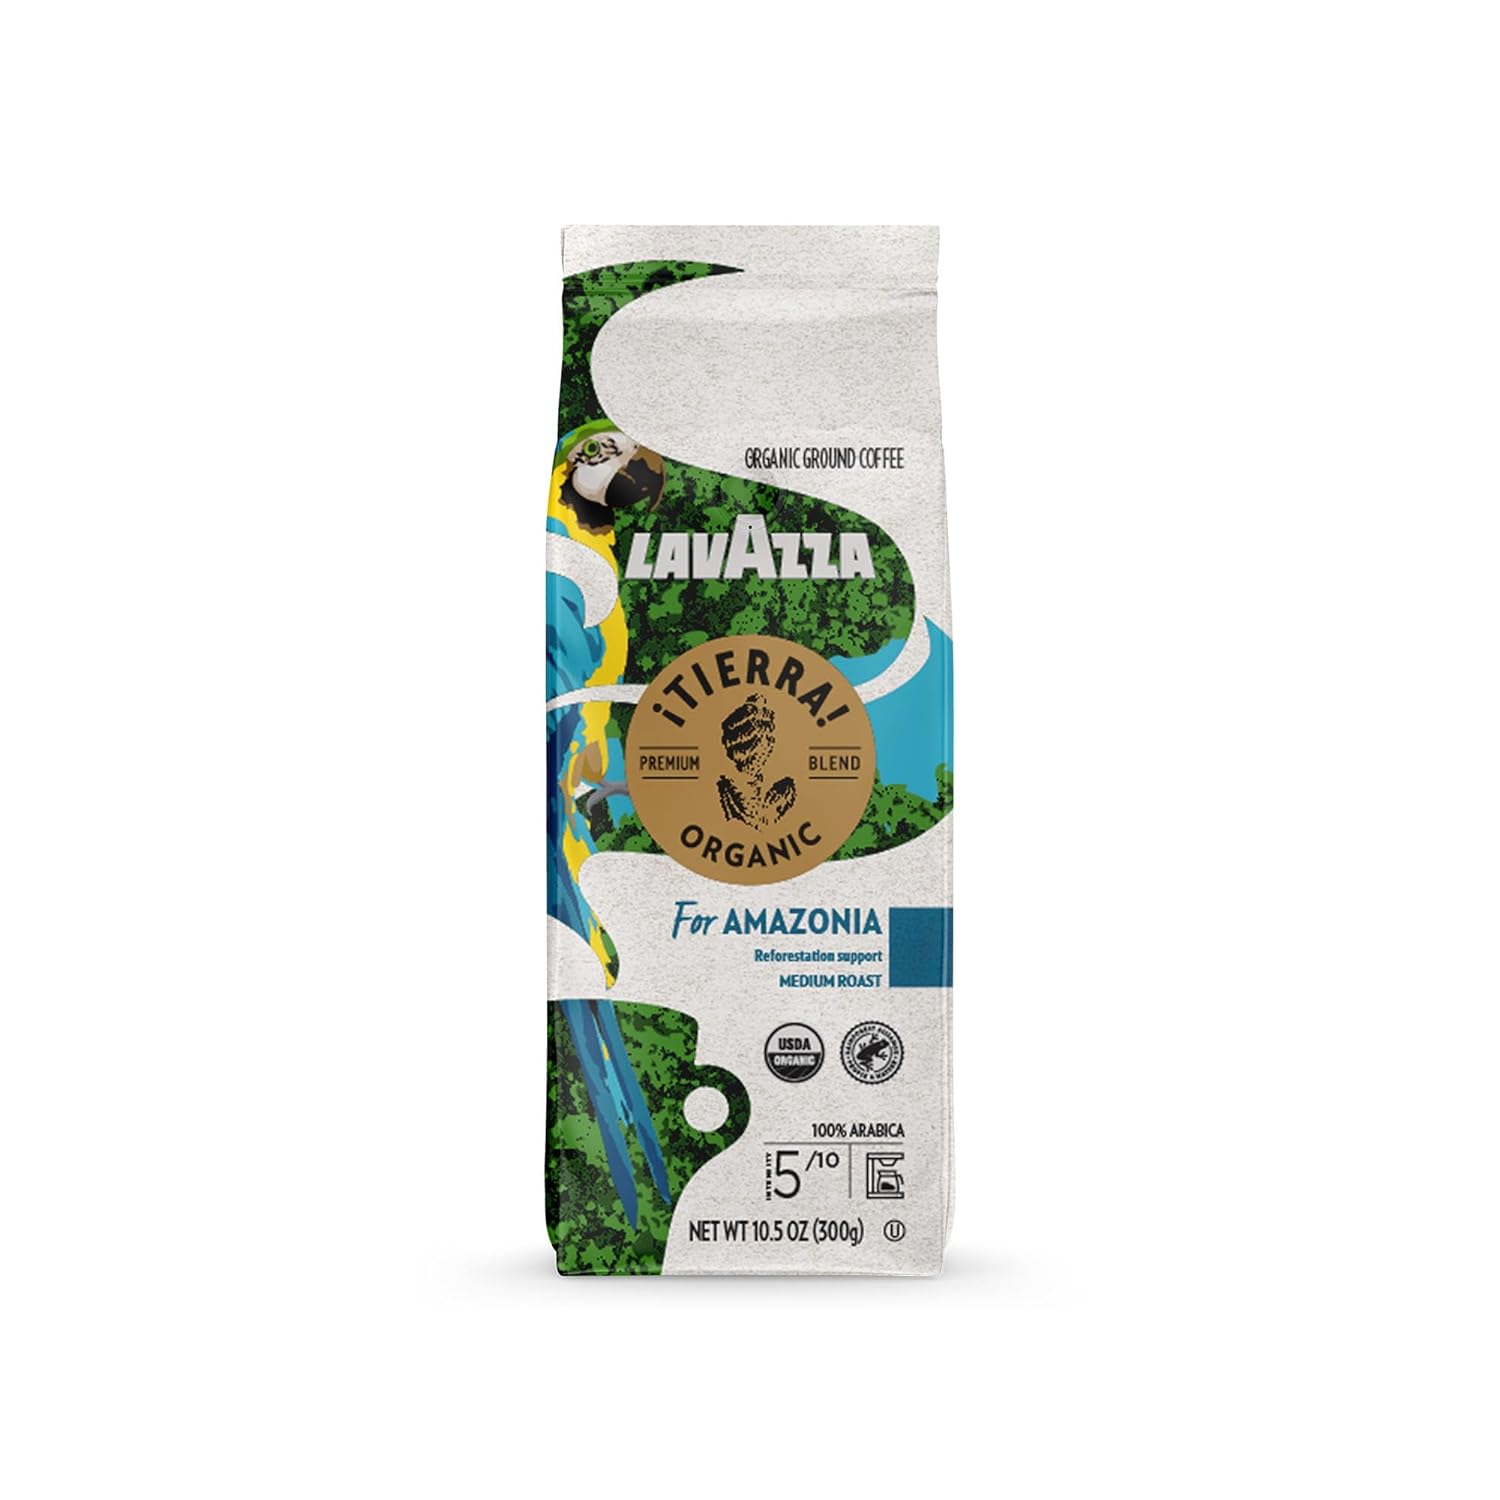 Lavazza ¡Tierra! Organic Amazonia Ground Coffee Medium Roast, Floral Notes, 10.5 Oz (Pack of 6) - Packaging May Vary